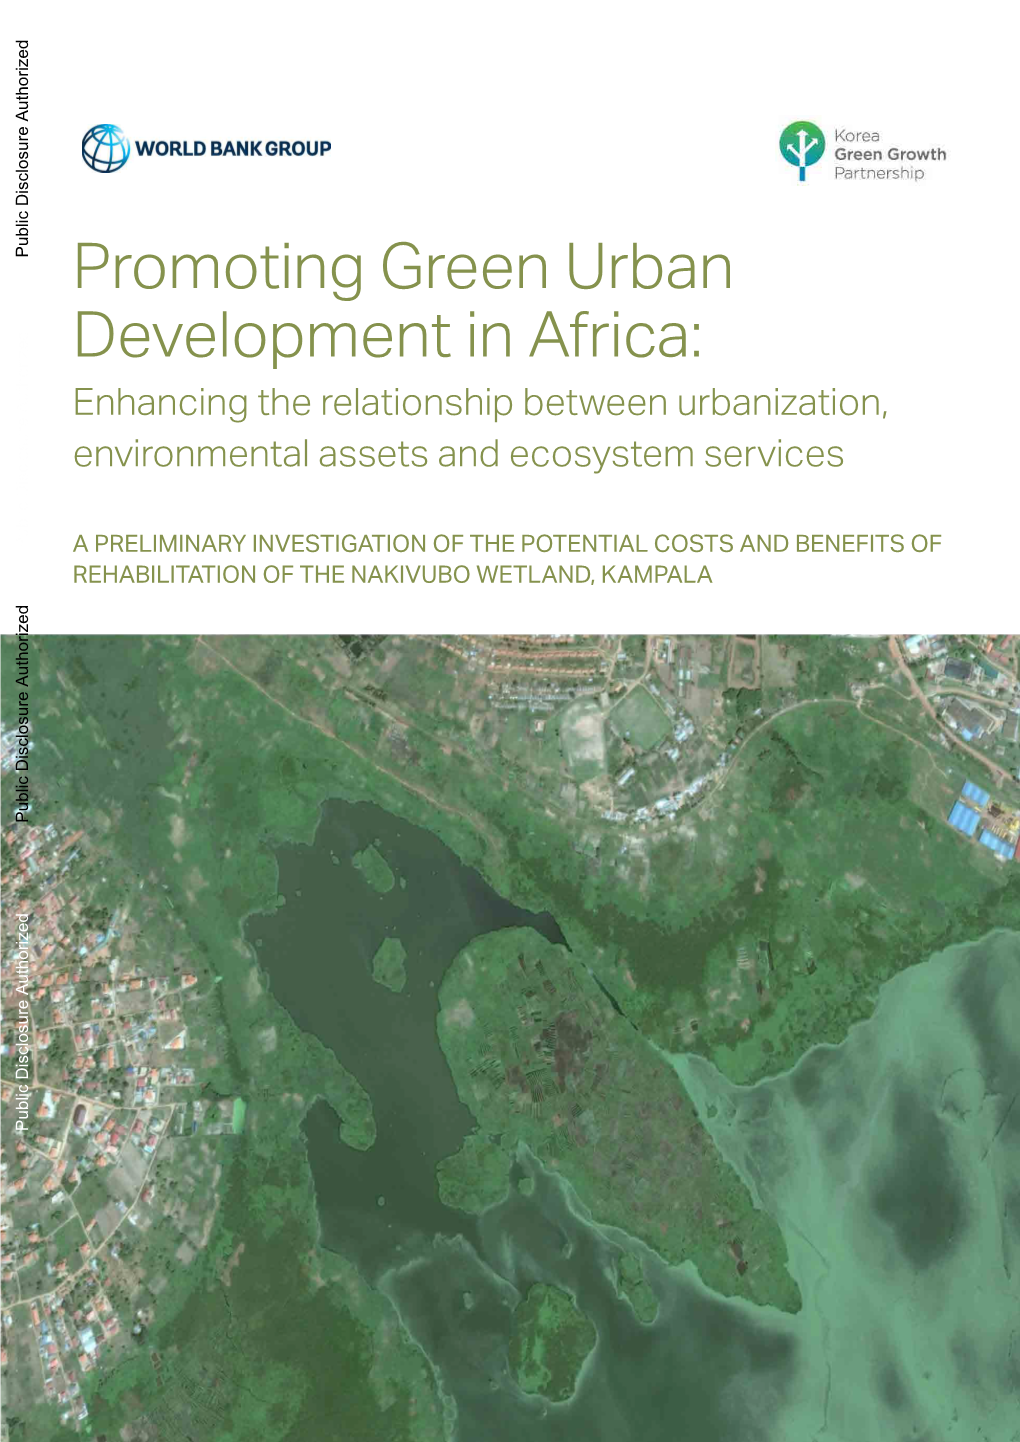 Promoting Green Urban Development in Africa: Enhancing the Relationship Between Urbanization, Environmental Assets and Ecosystem Services